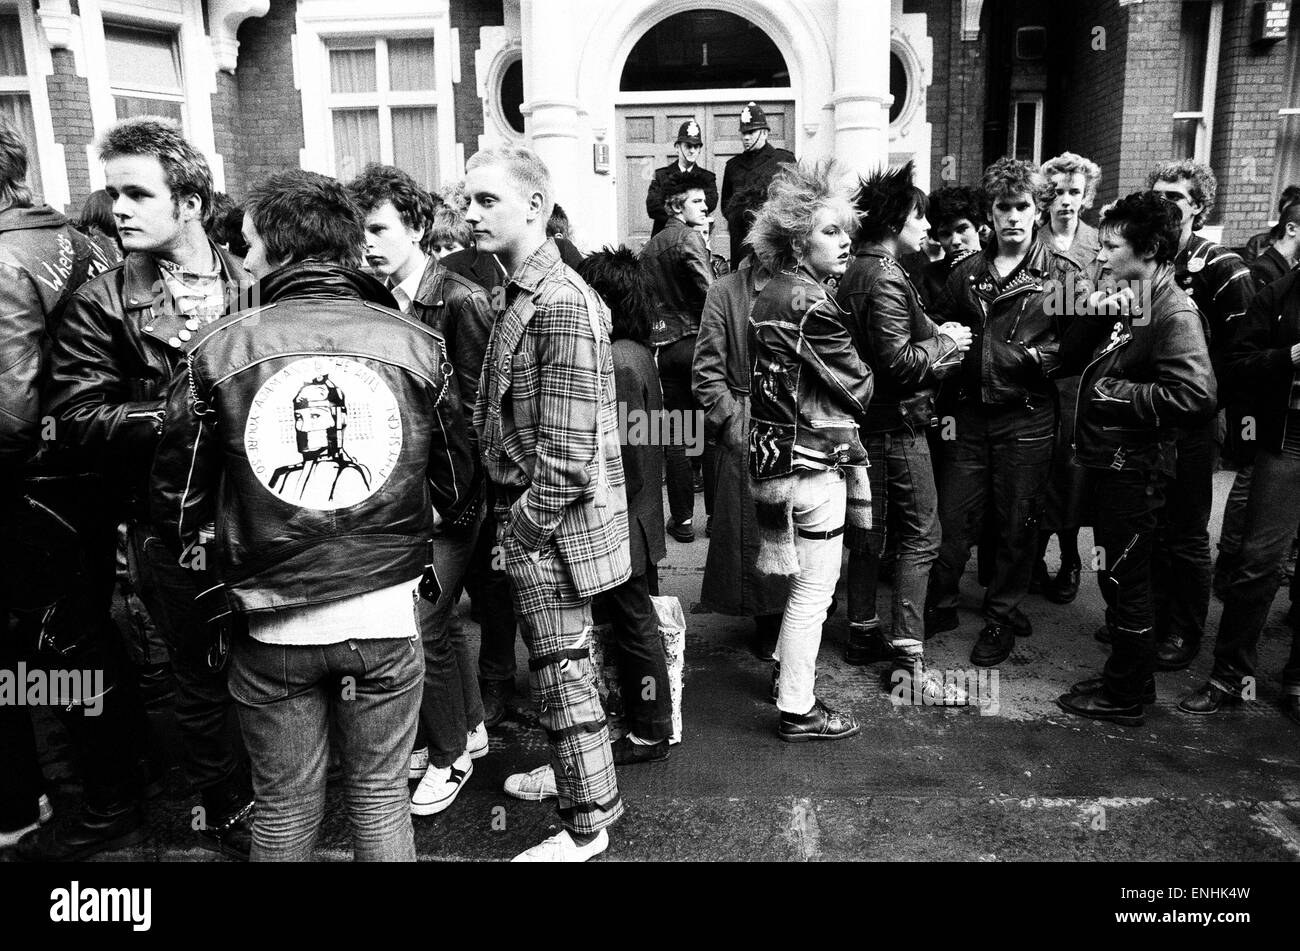 Punk rockers march in London. 3rd February 1980. Stock Photo